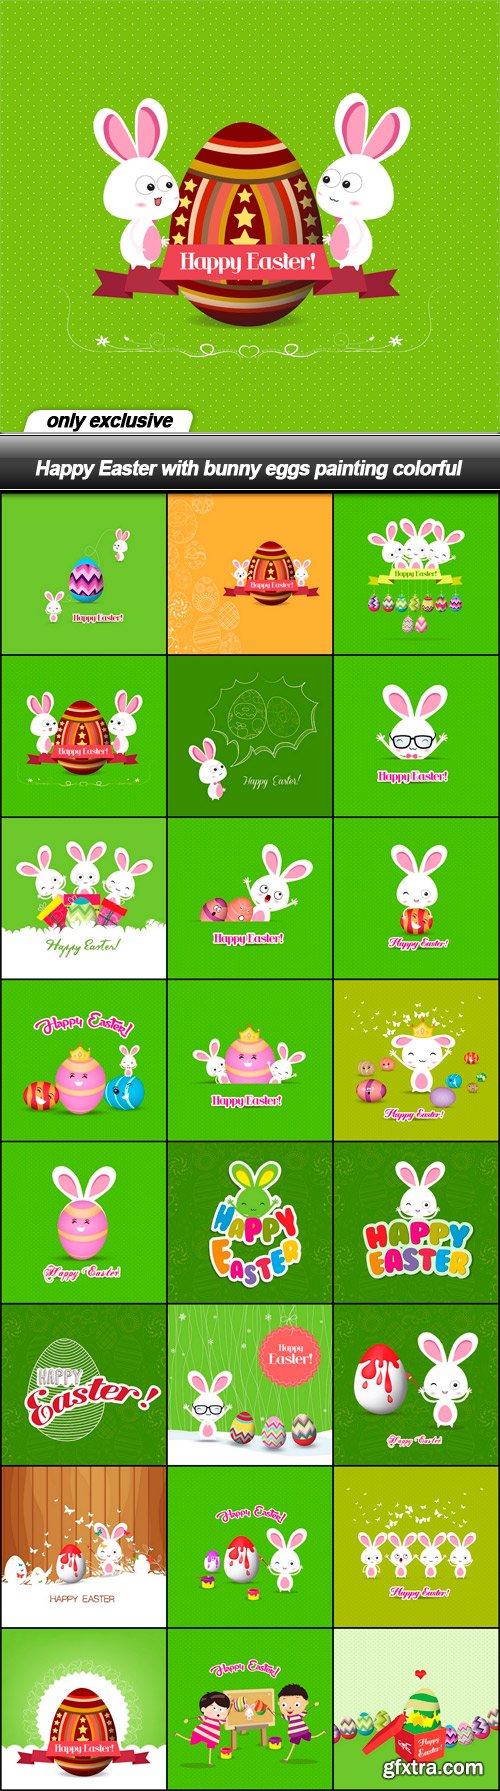 Happy Easter with bunny eggs painting colorful - 24 EPS